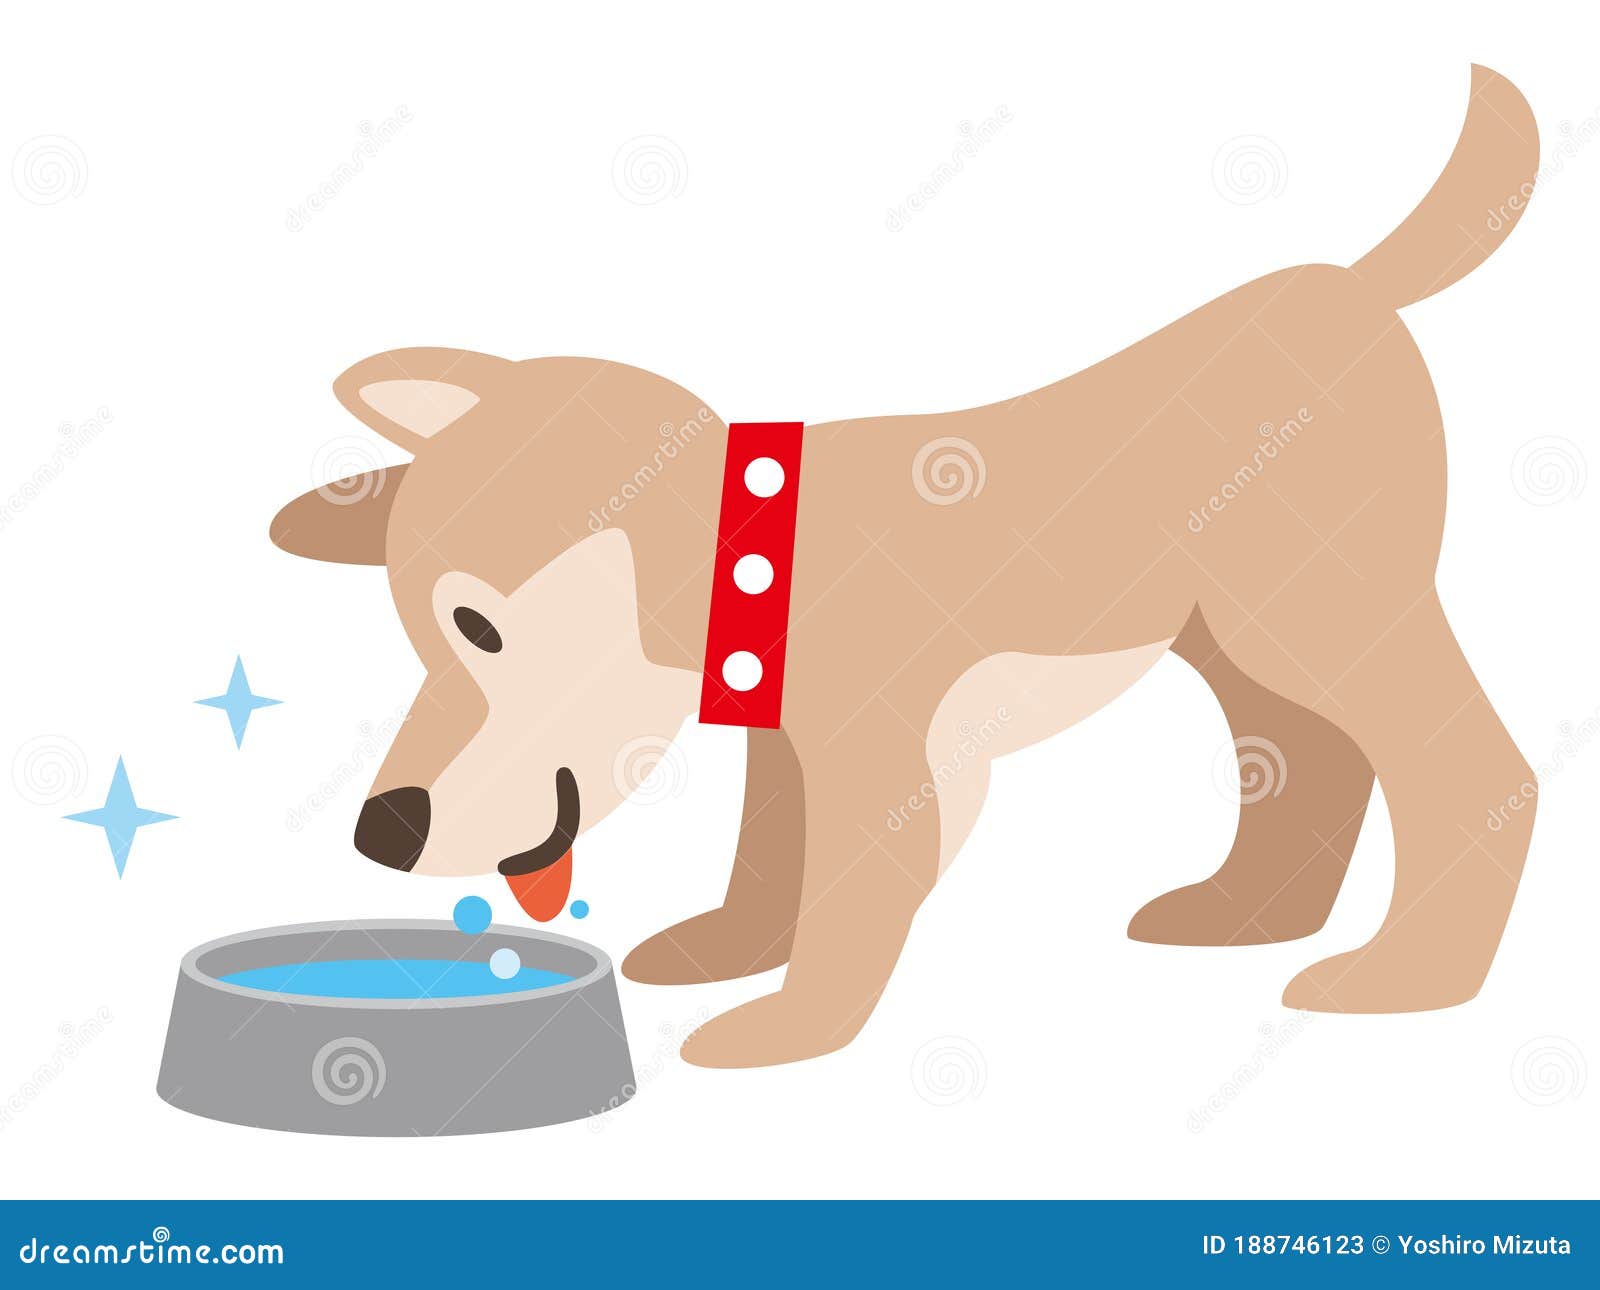 Illustration of a Dog Drinking Water Stock Vector - Illustration of water,  lifestyle: 188746123